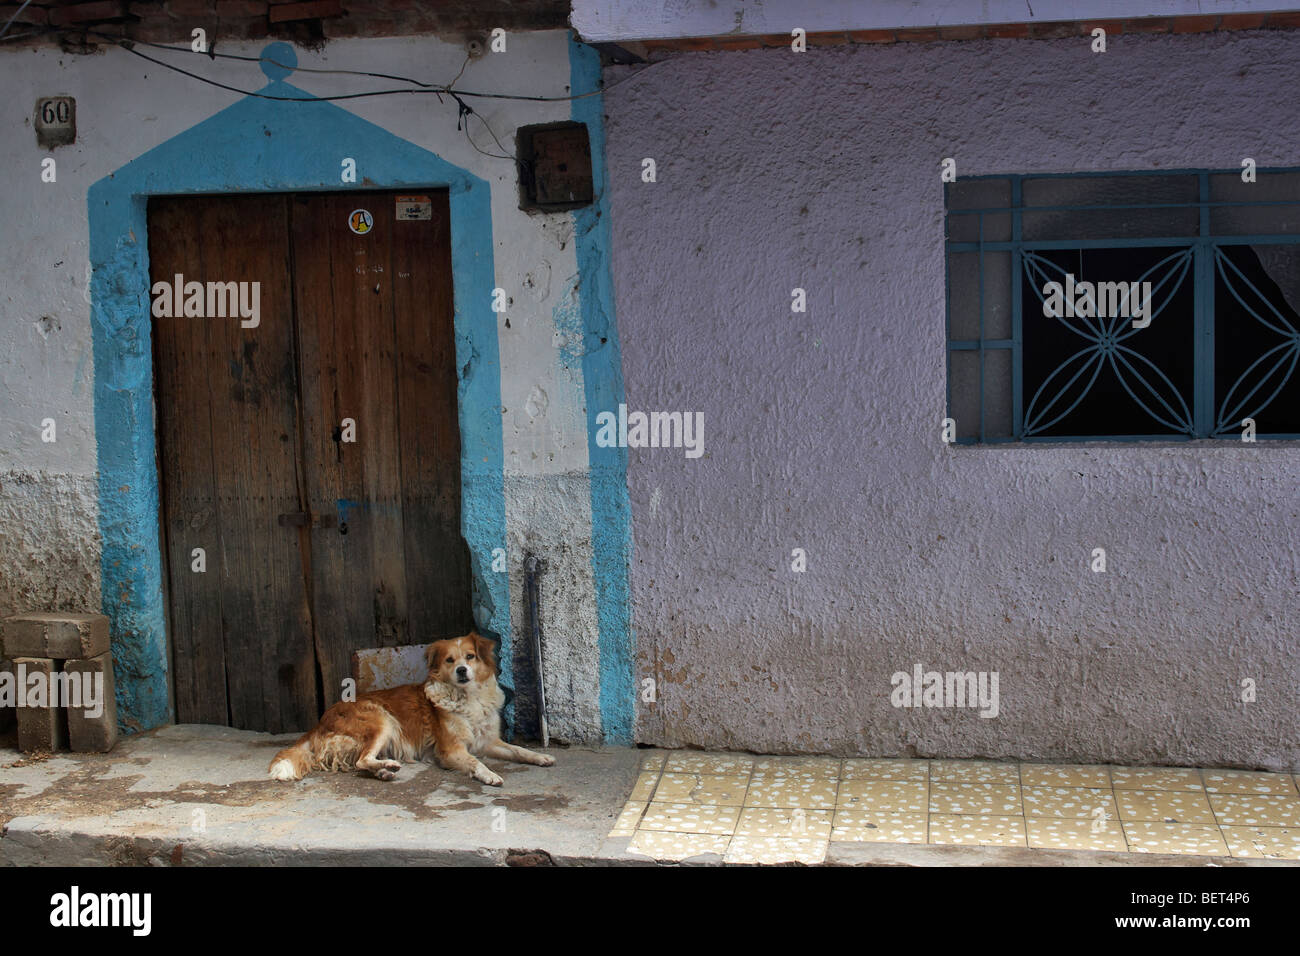 A pet dog rests at the door of a blue and purple residence in Ajijic, Mexico. Stock Photo